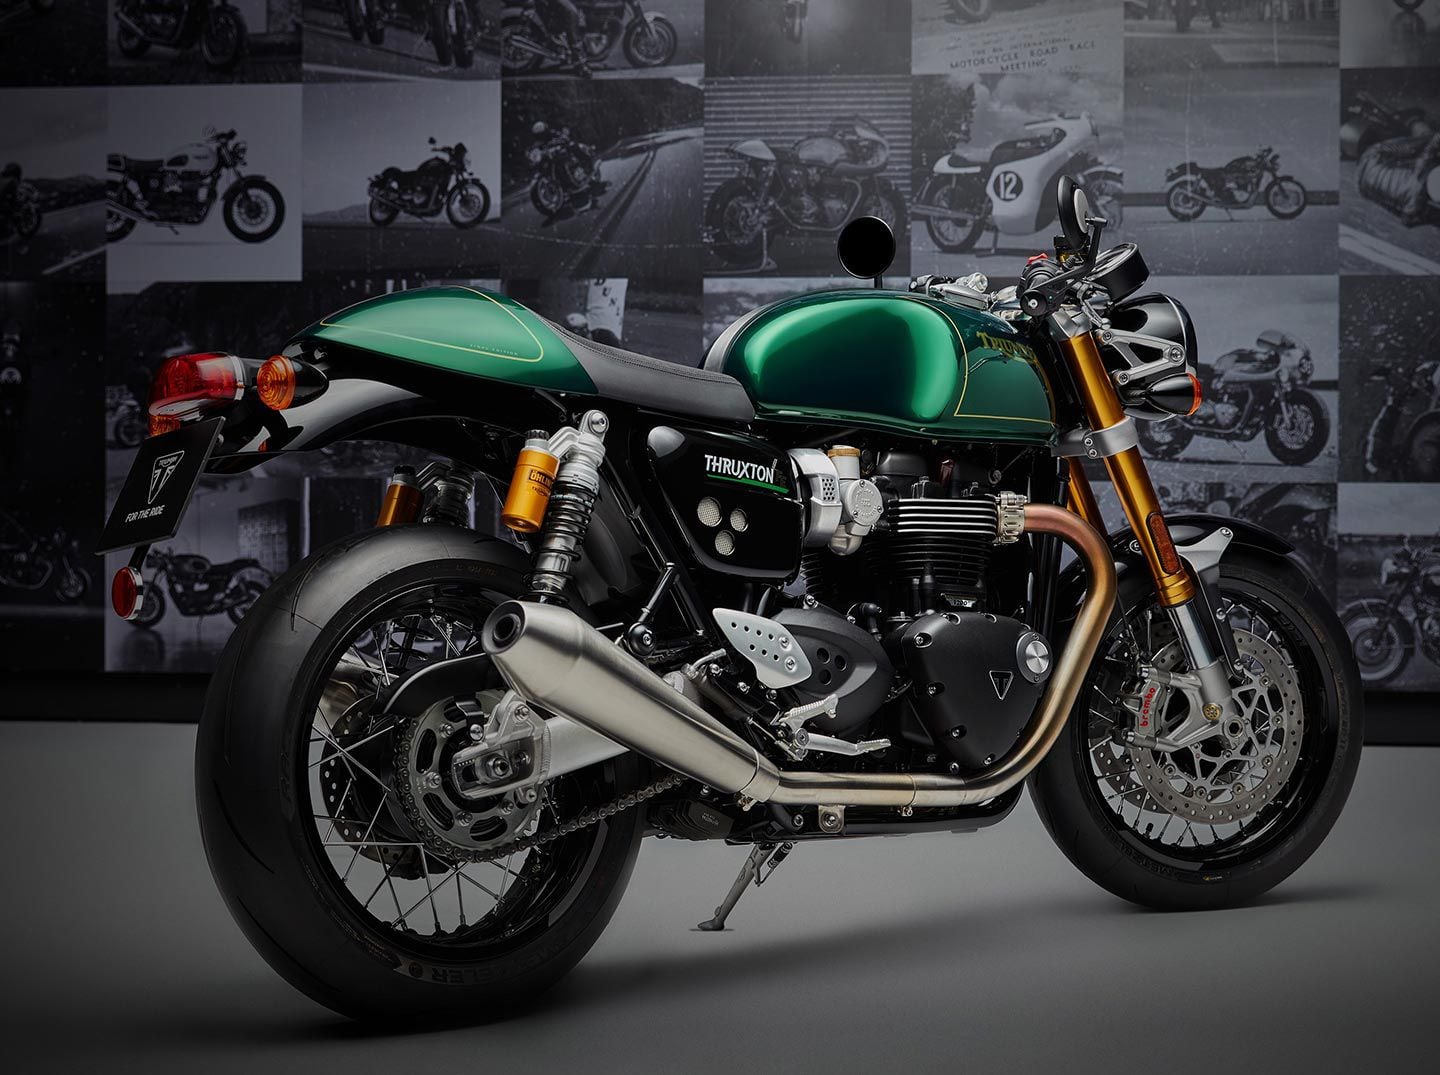 The 2025 Thruxton FE carries on the cafe racer styling with clip-ons and bullet seat, and retains premium Showa and Öhlins components from the RS.